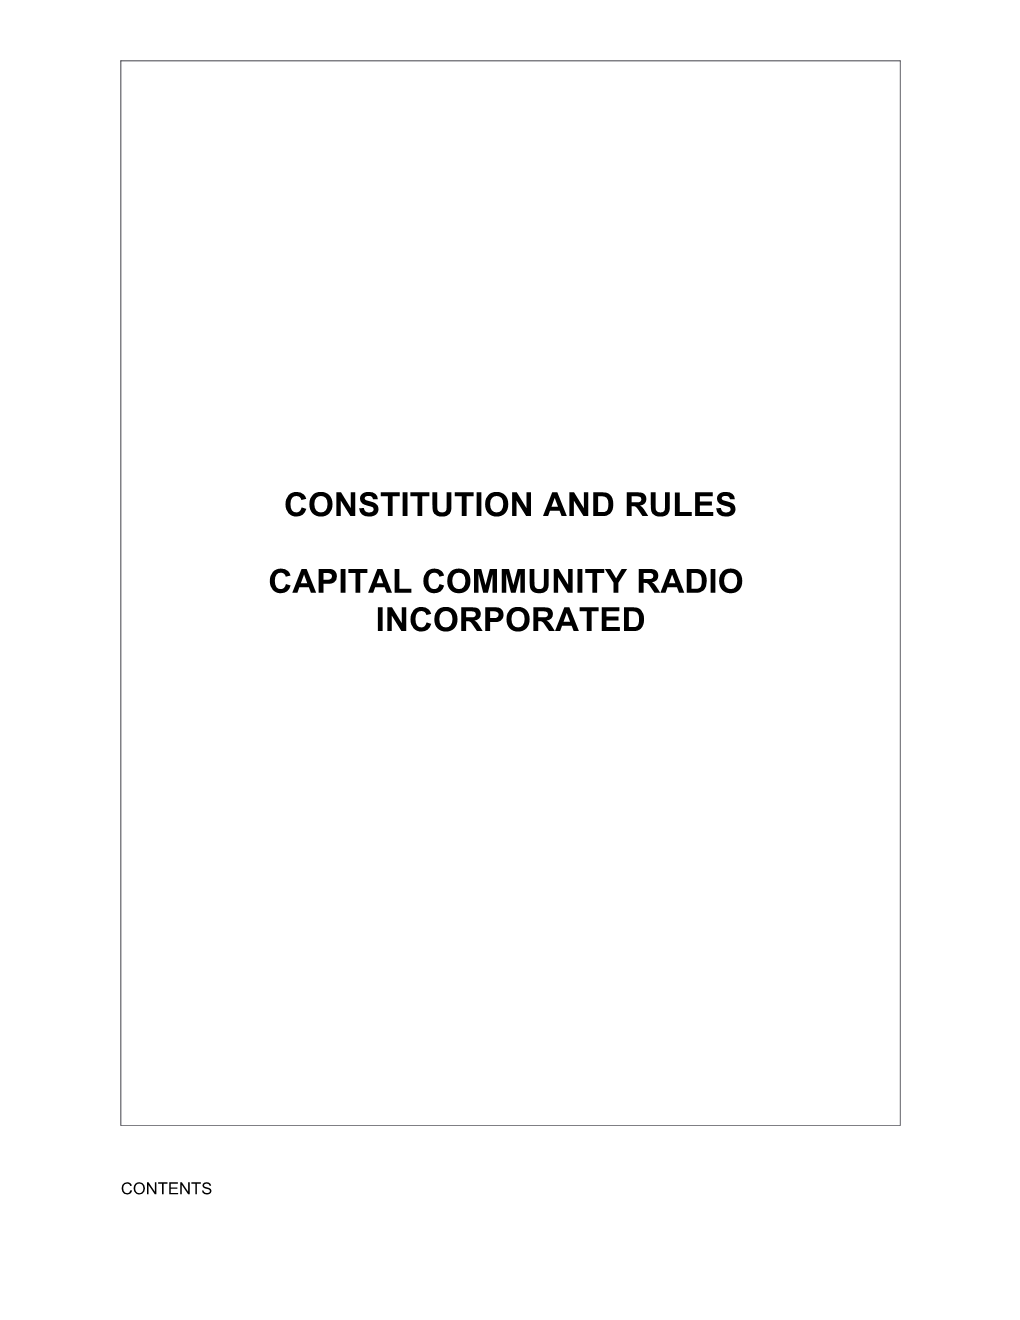 Constitution and Rules of Capital Community Radio Incorporated